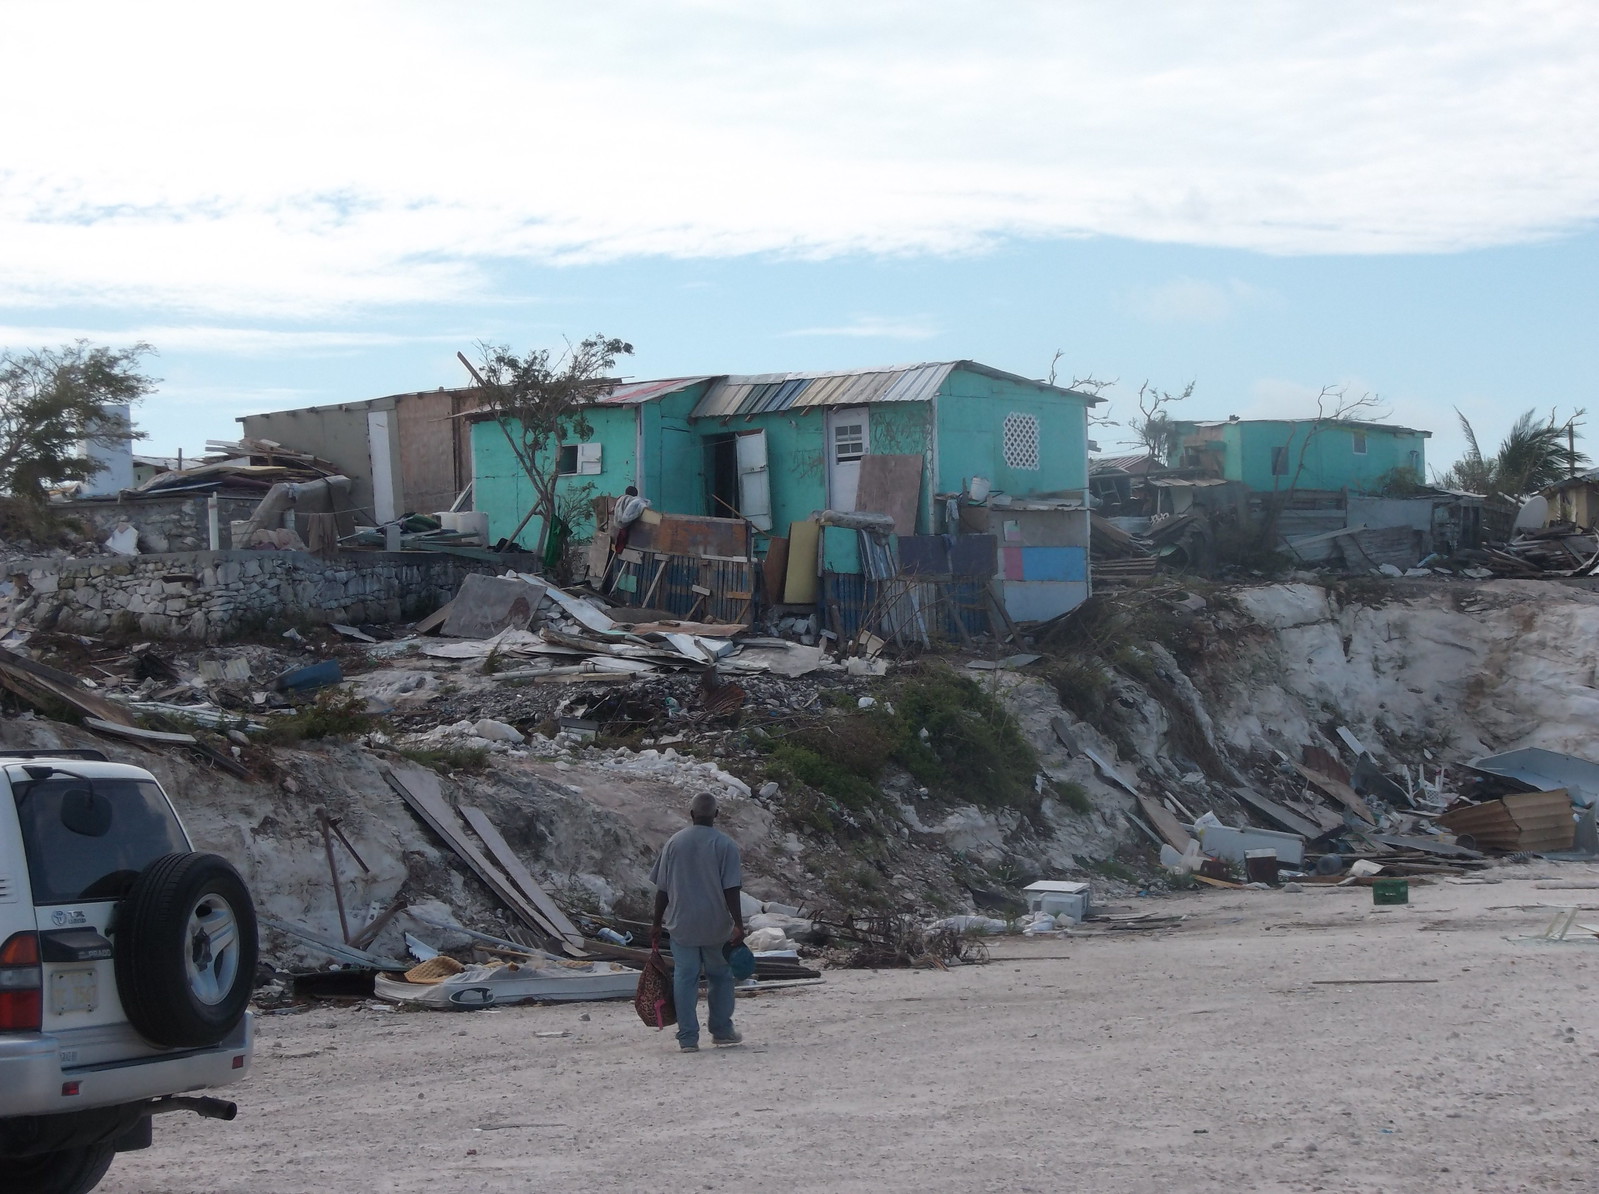 The Salvation Army responds to Hurricane Maria damage in the Turks and Caicos Islands